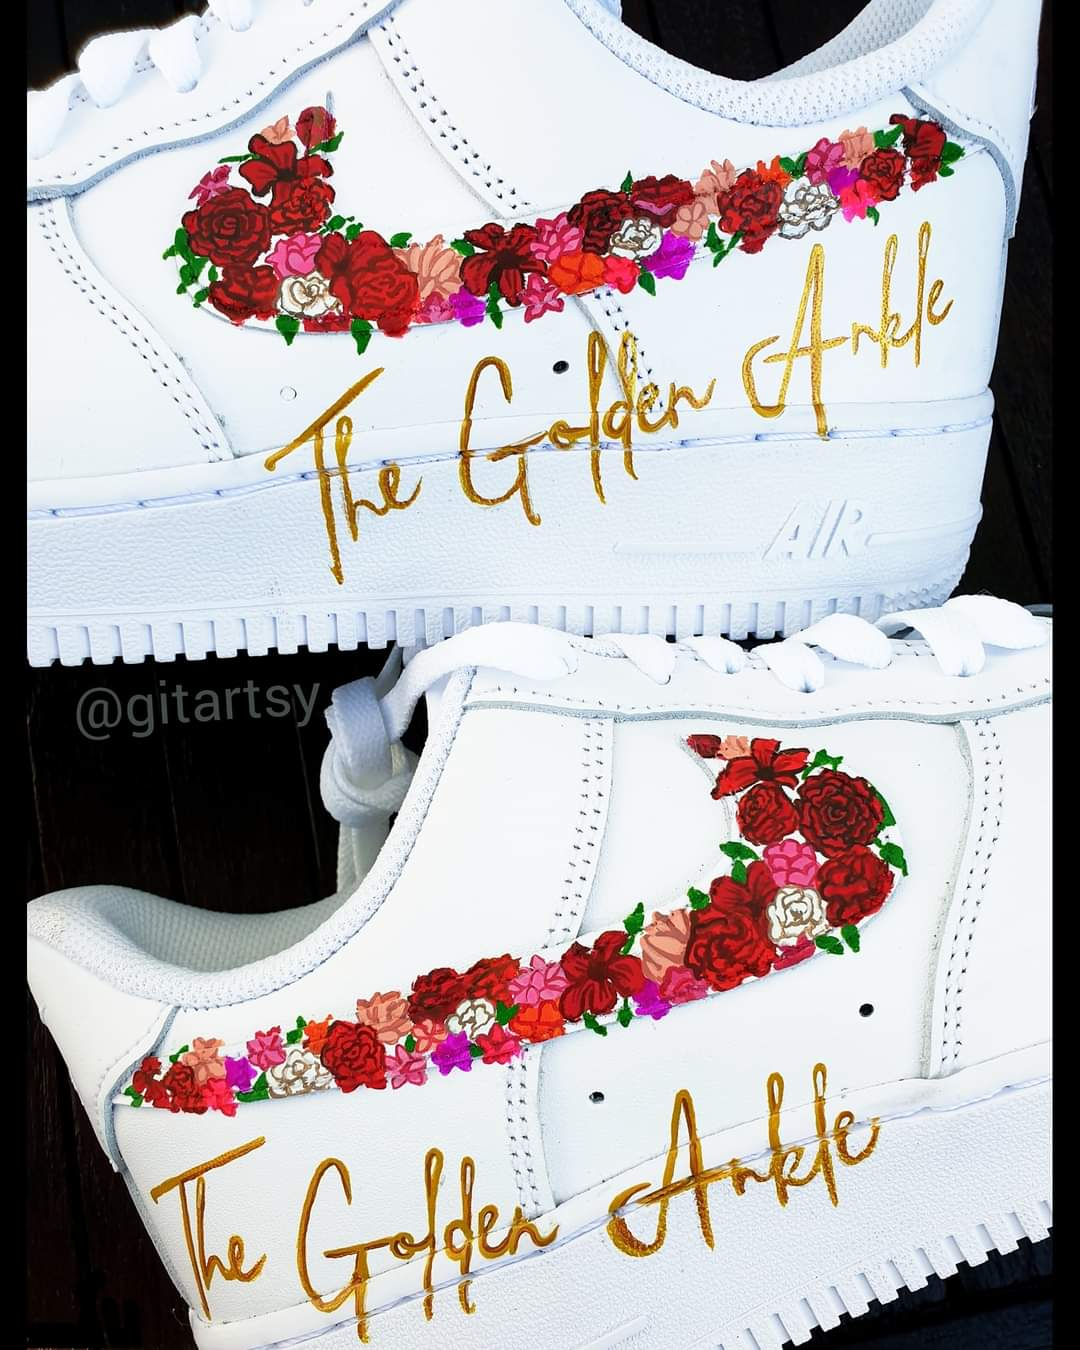 Custom Nike AF1s painted for Jewellery brand: "The golden Ankle" 